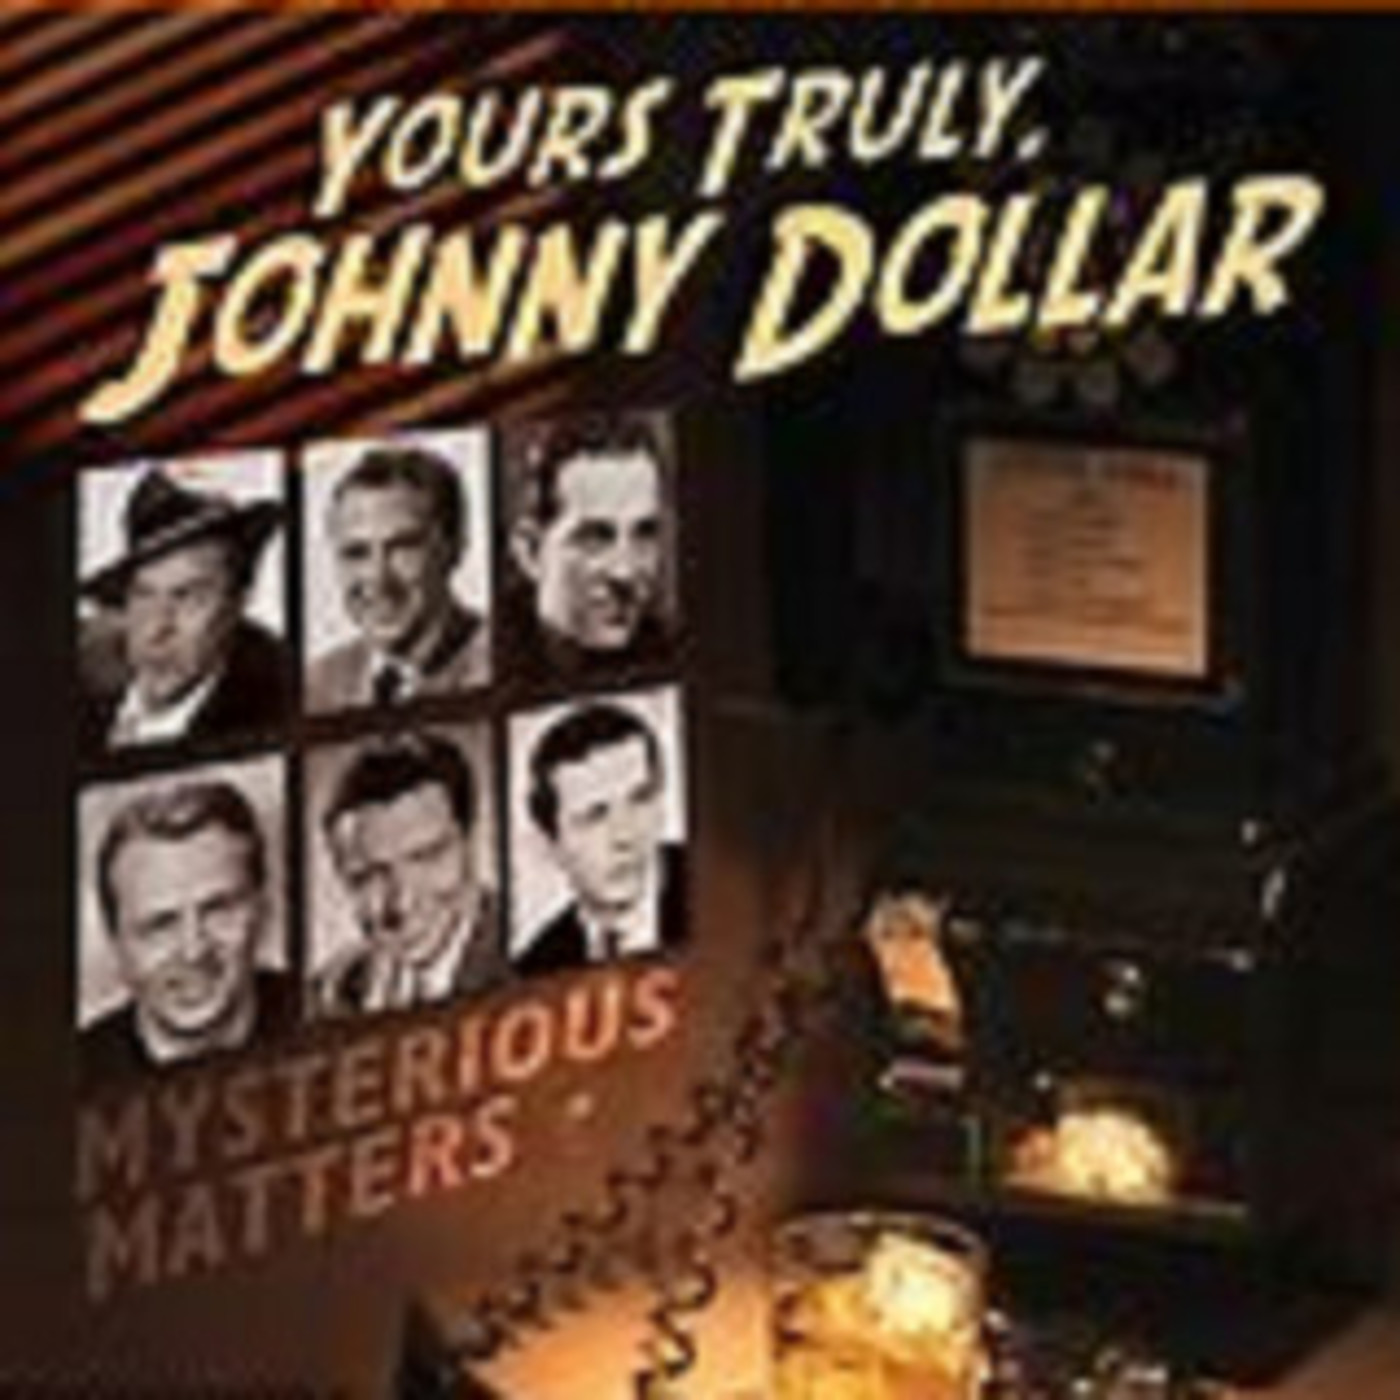 Yours Truly, Johnny Dollar - 061762, episode 796 - The All Too Easy Matter